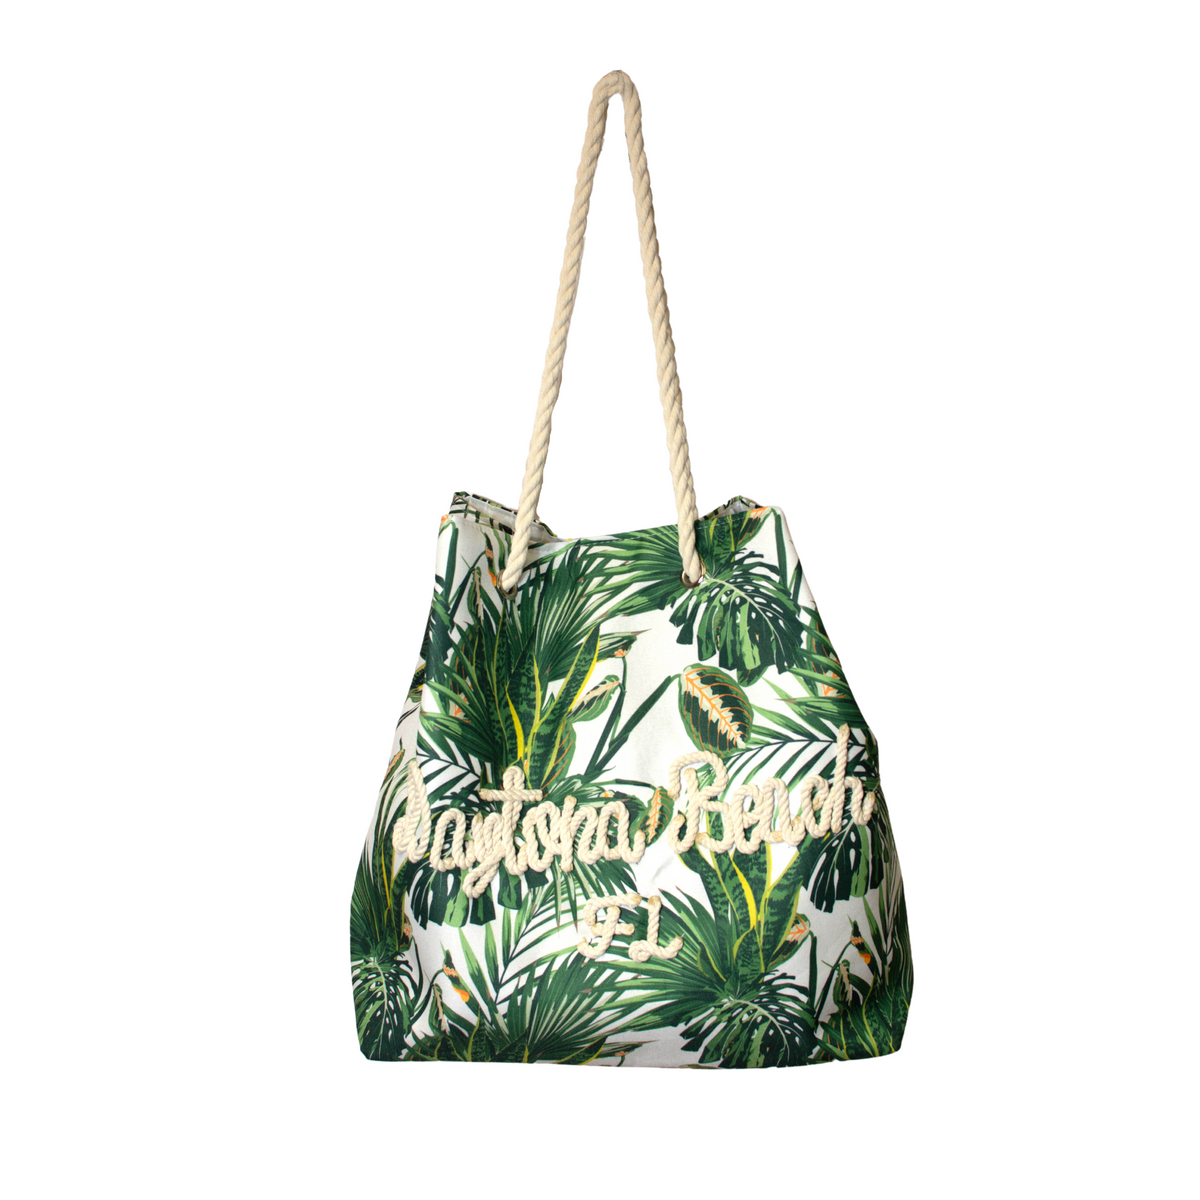 LARGE BEACH TOTE BAGS